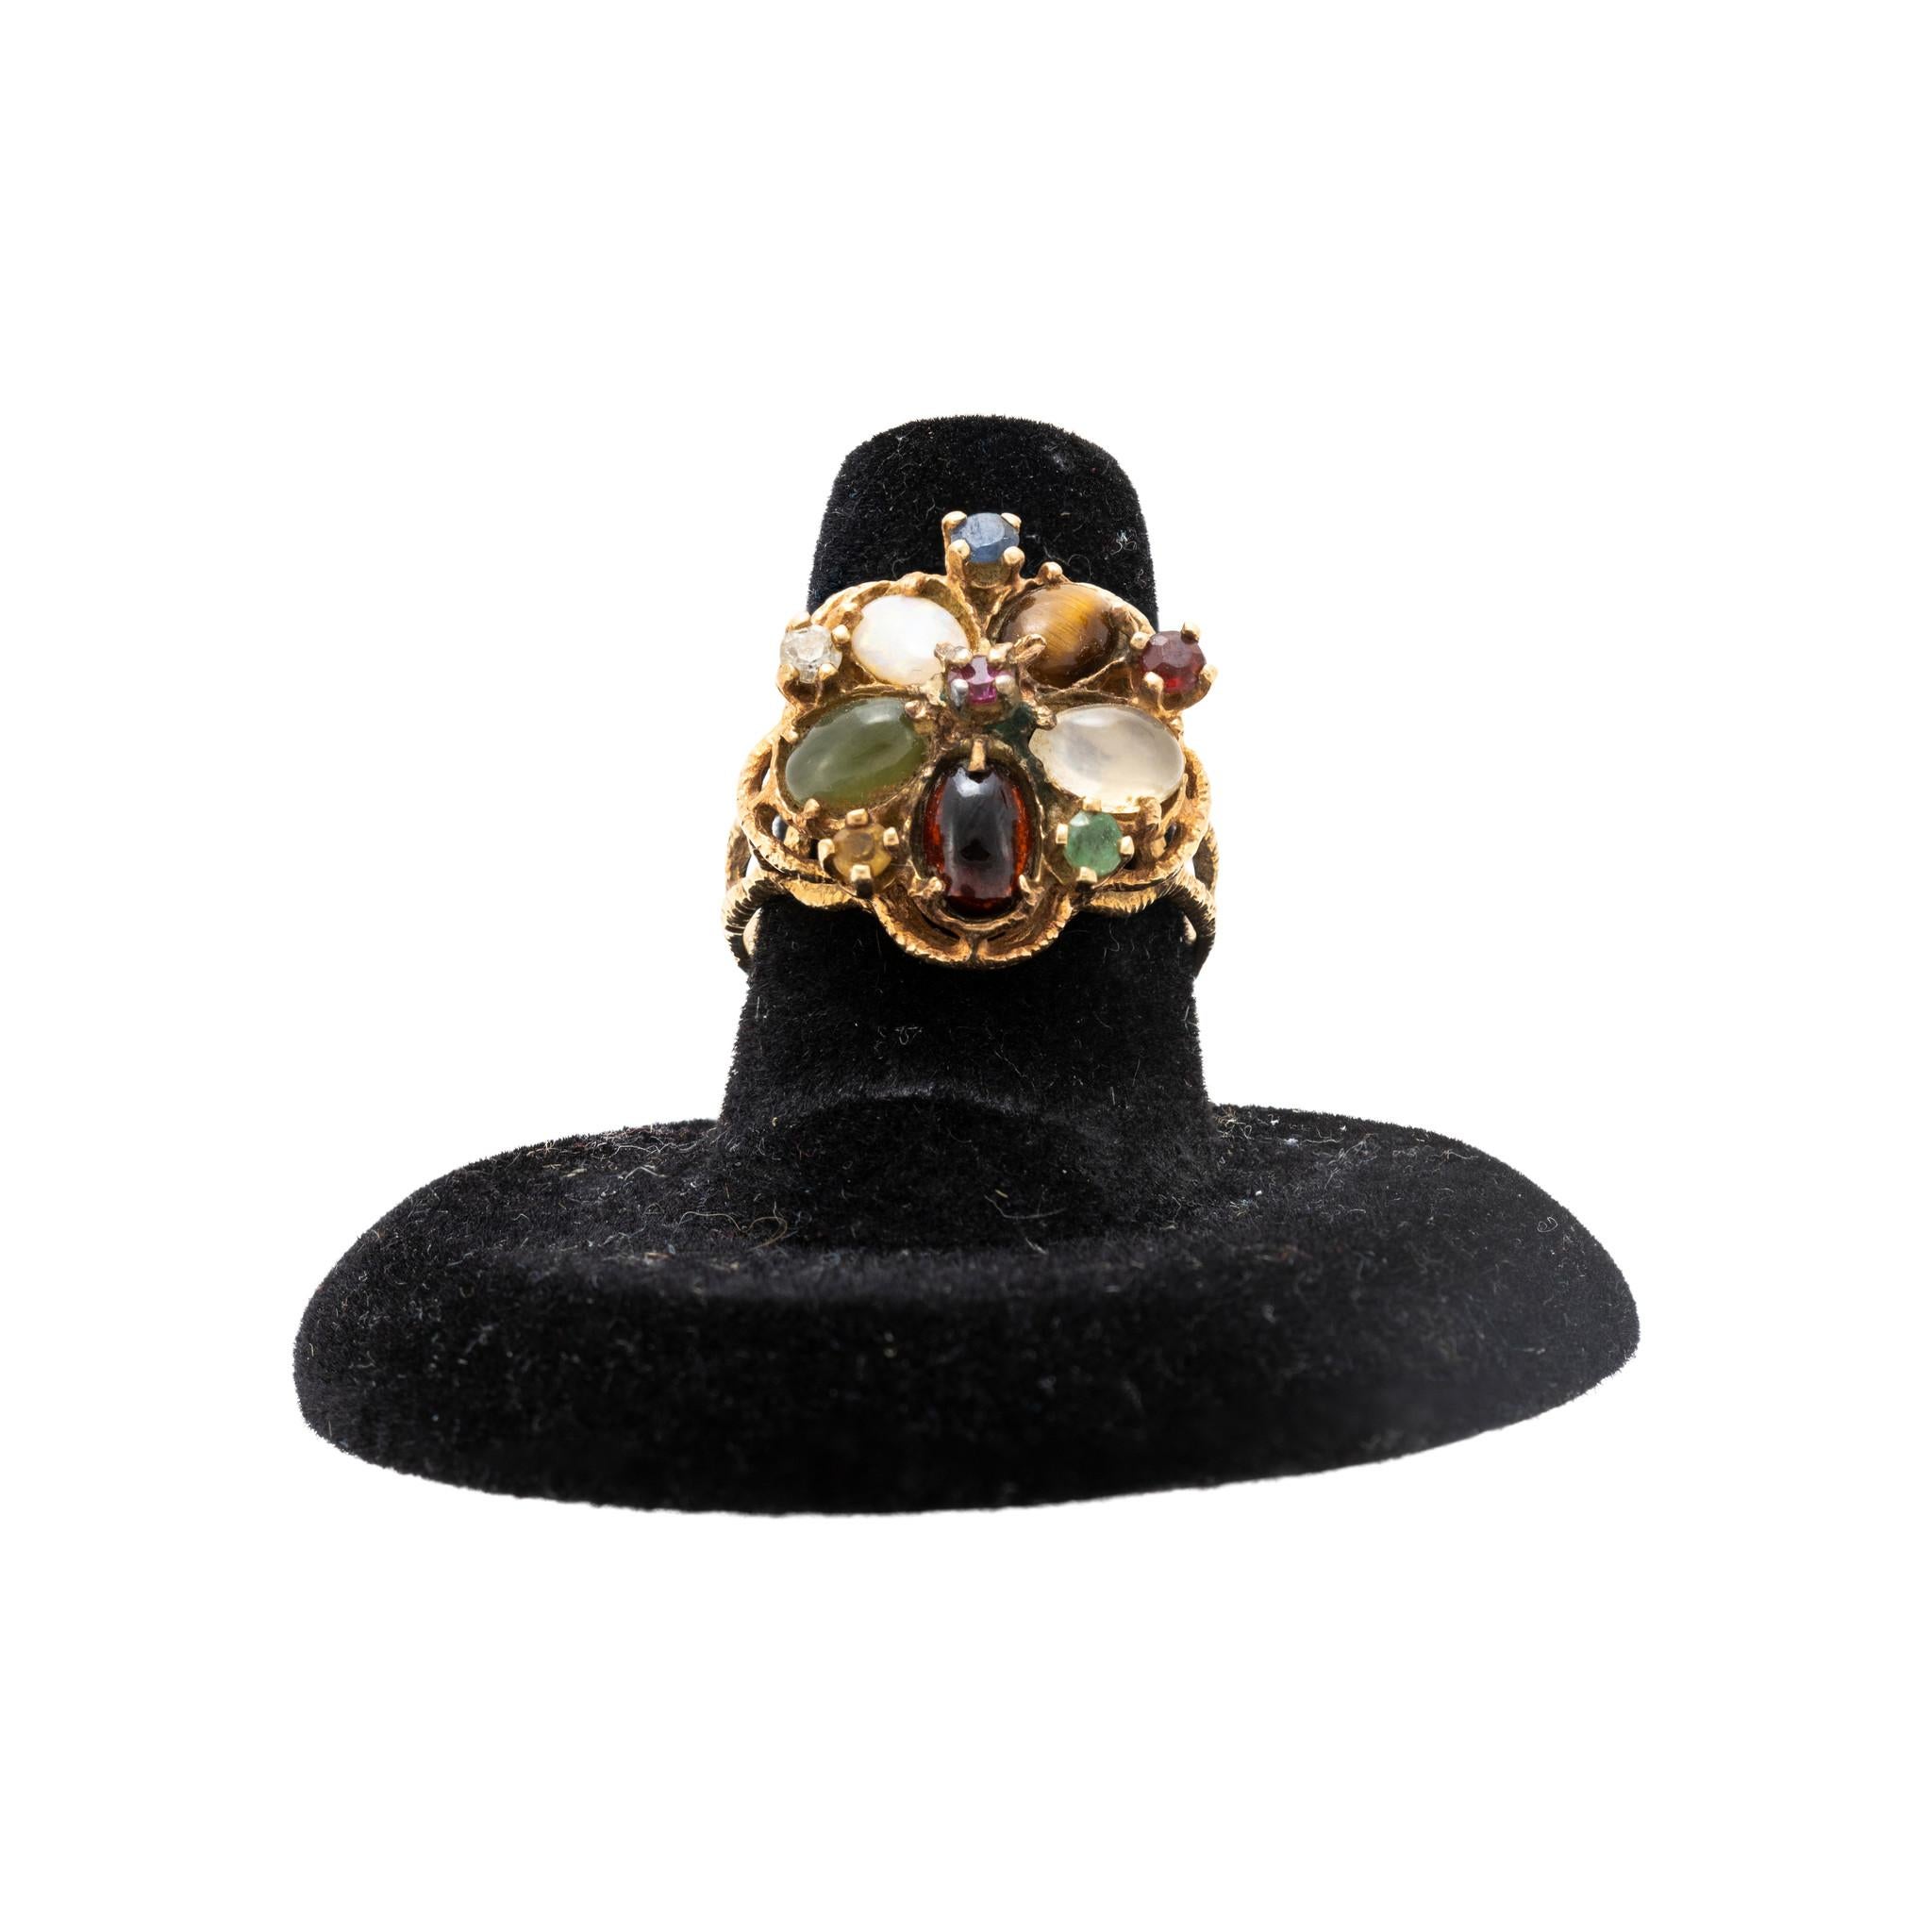 Victorian filigree in 14kt yellow gold with natural garnet, ruby, sapphire, emerald, moonstone, diamond, citrine and tiger eye. Intricate detail in gold with smooth band, featuring an almost stippled texture. Larger stones are oval cut and arranged